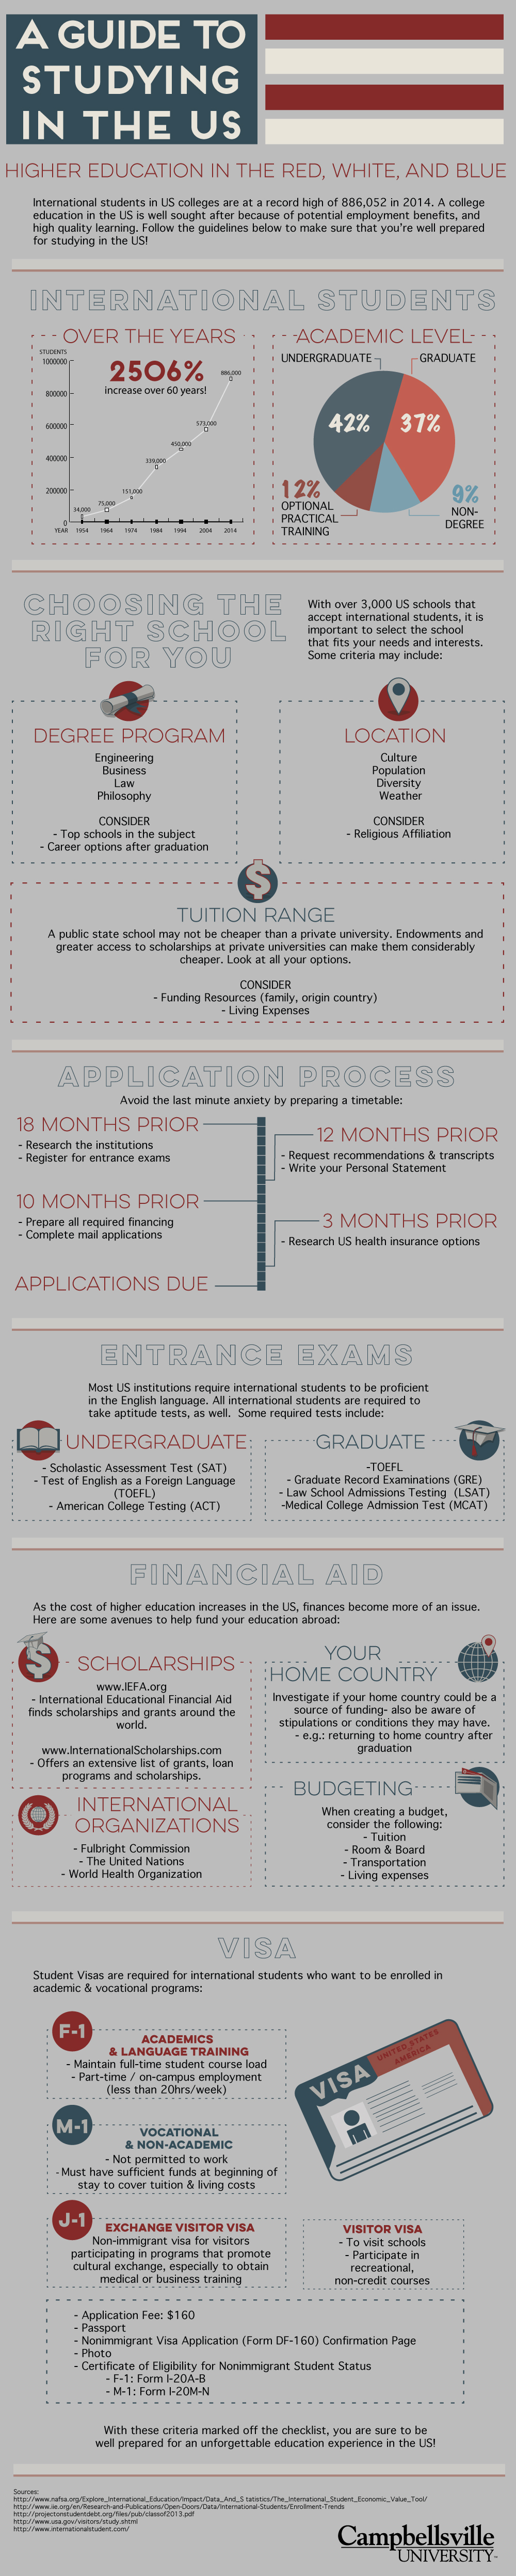 Campbellsville_Study_in_USA_Infographic